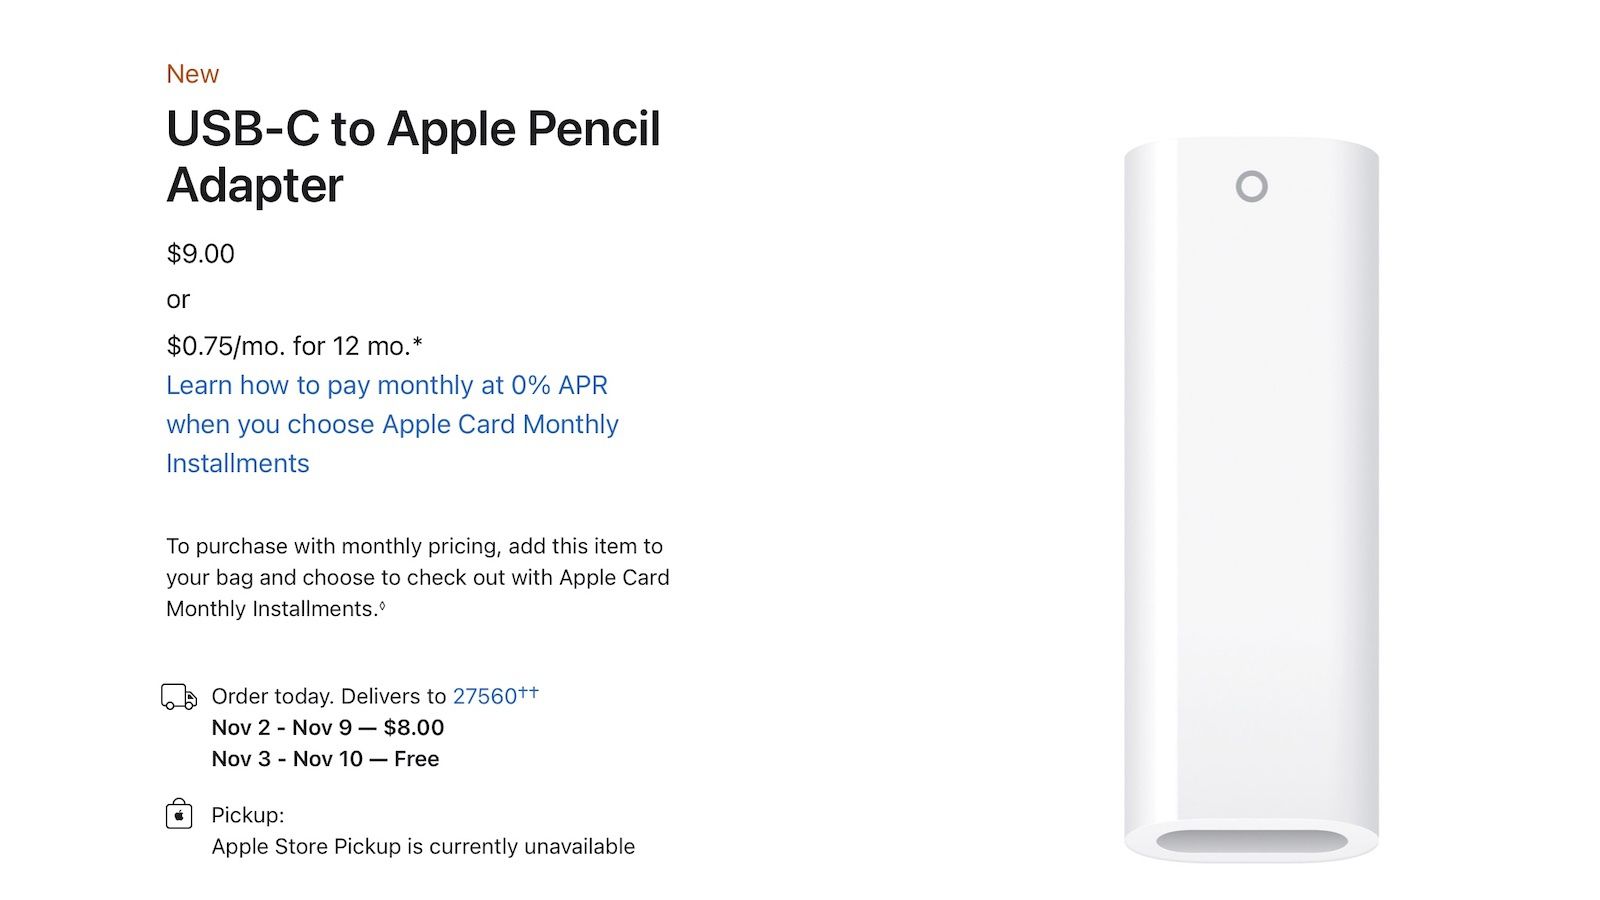 How to connect an Apple Pencil to your iPad